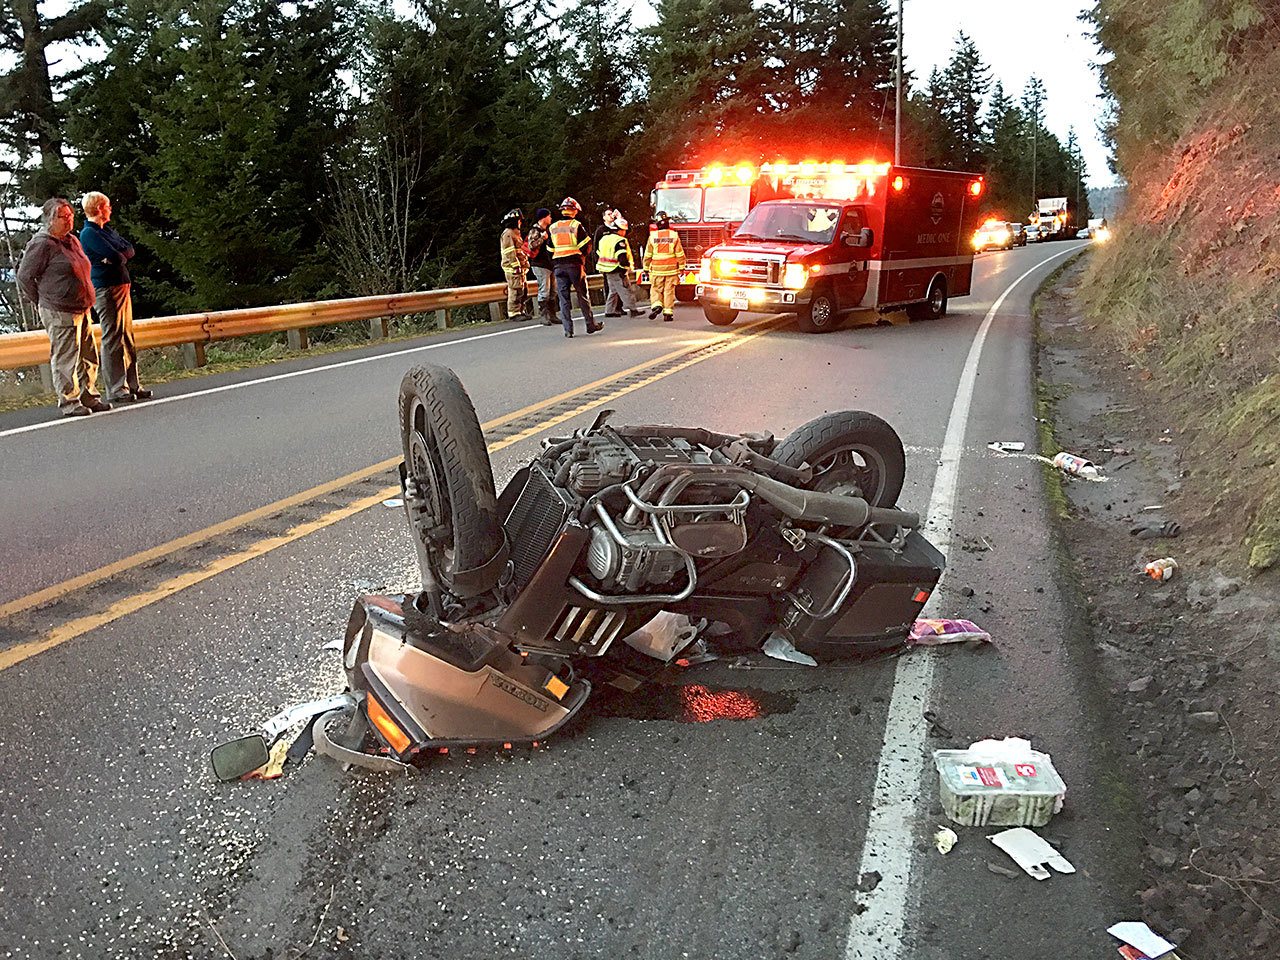 Motorcyclist in critical condition after crash near Port Townsend